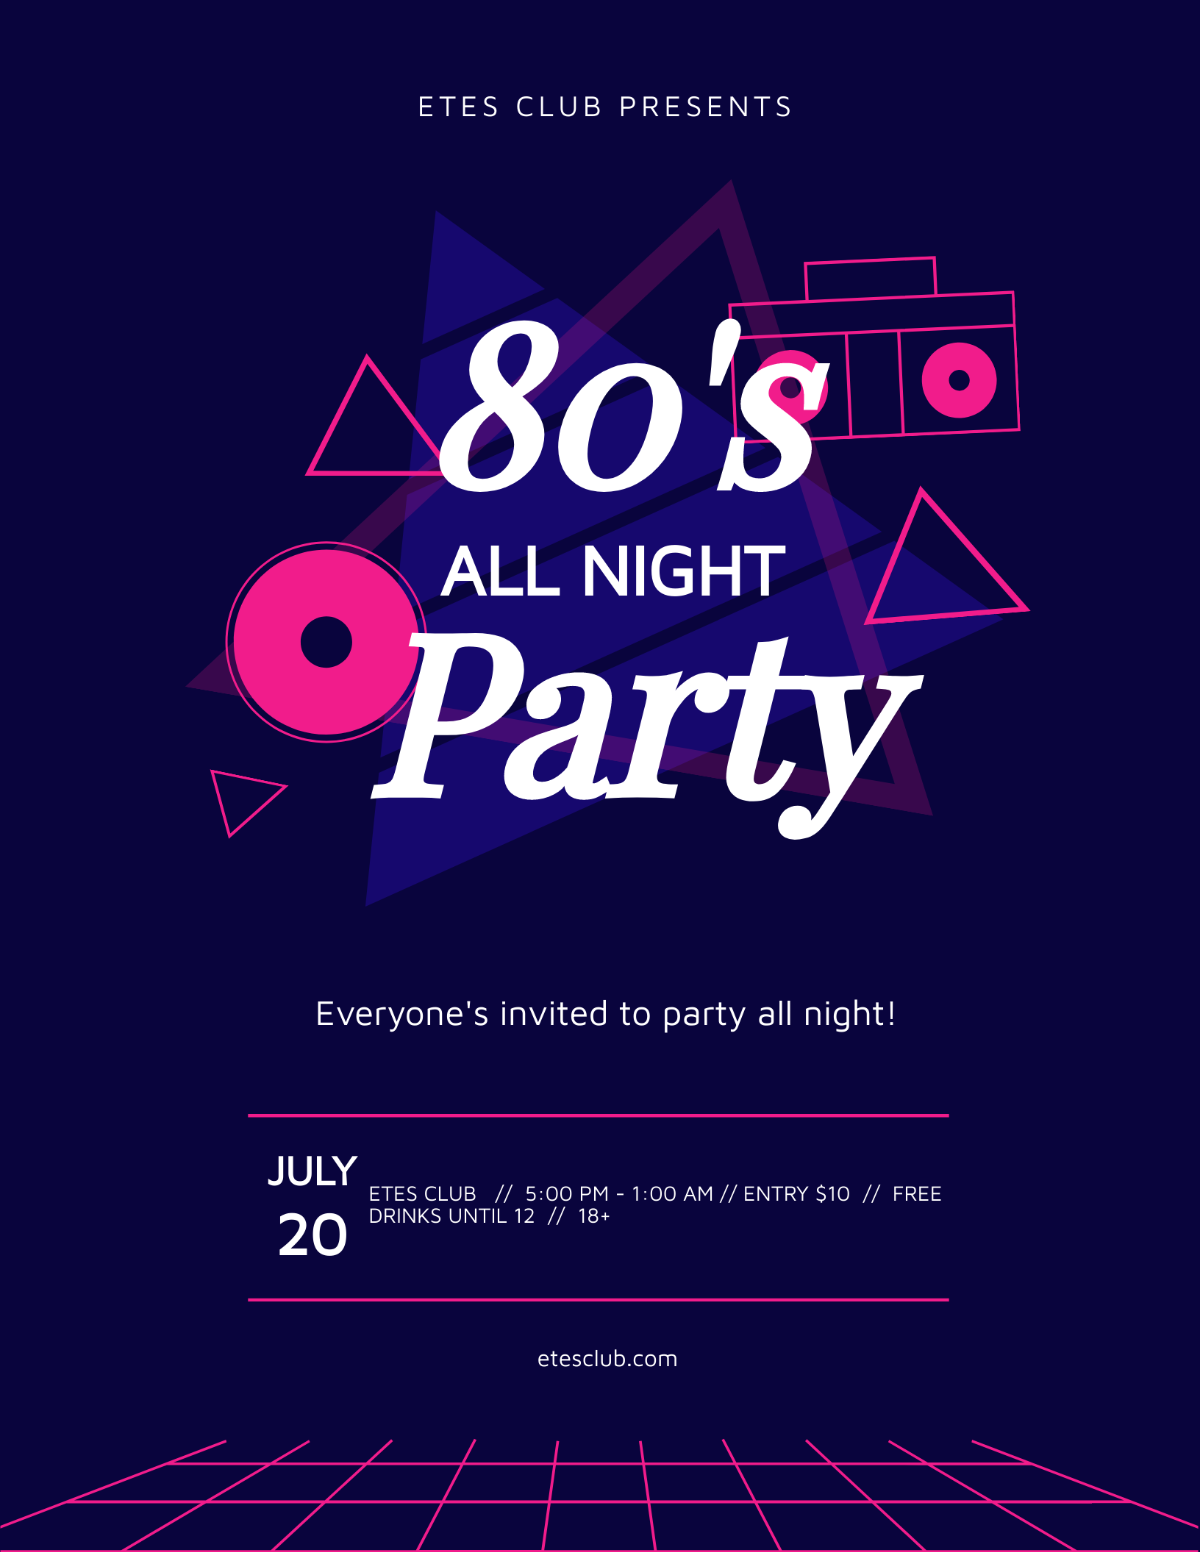 Classics 80s party Flyer Template